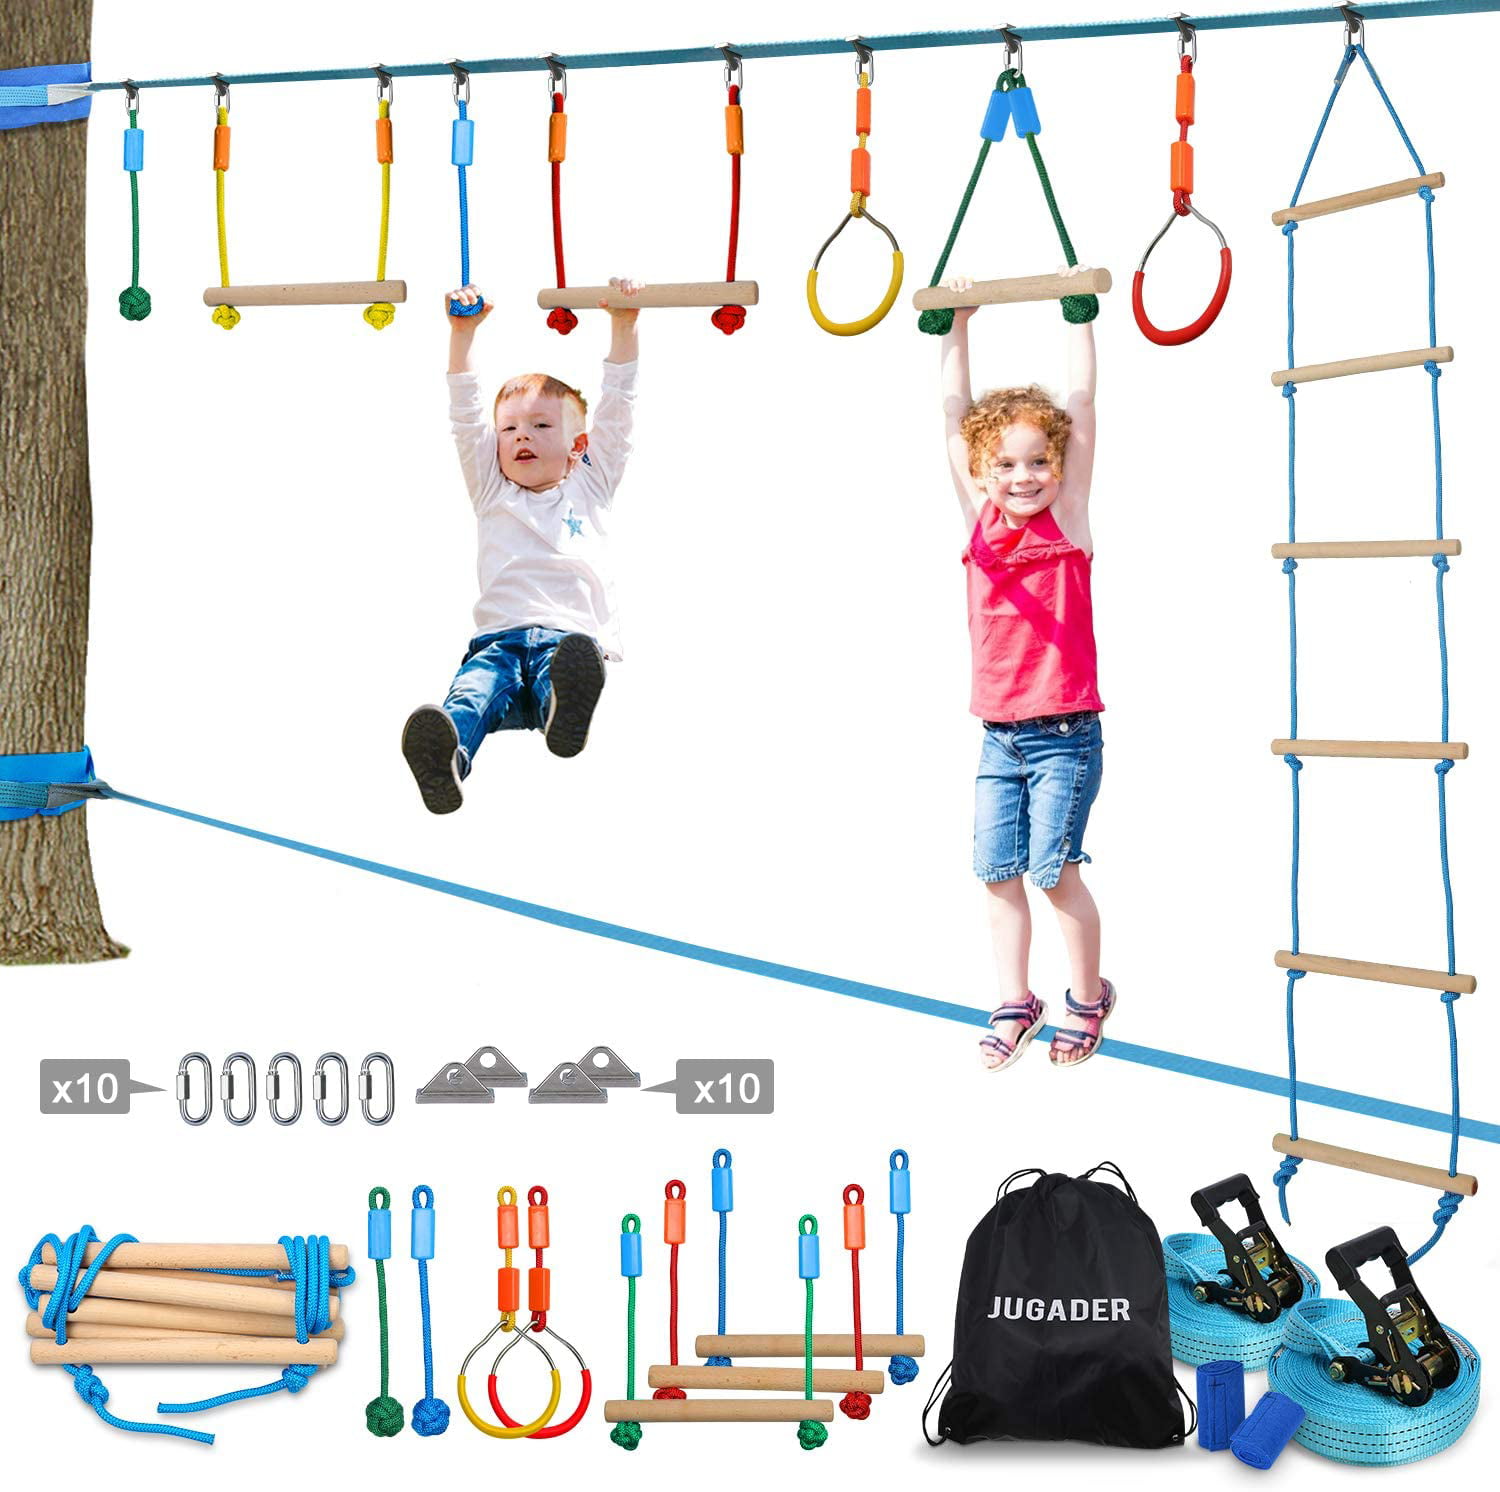 Ninja Warrior Obstacle Course for Kids Slackline Kit 50' with 8 Accessories ... 